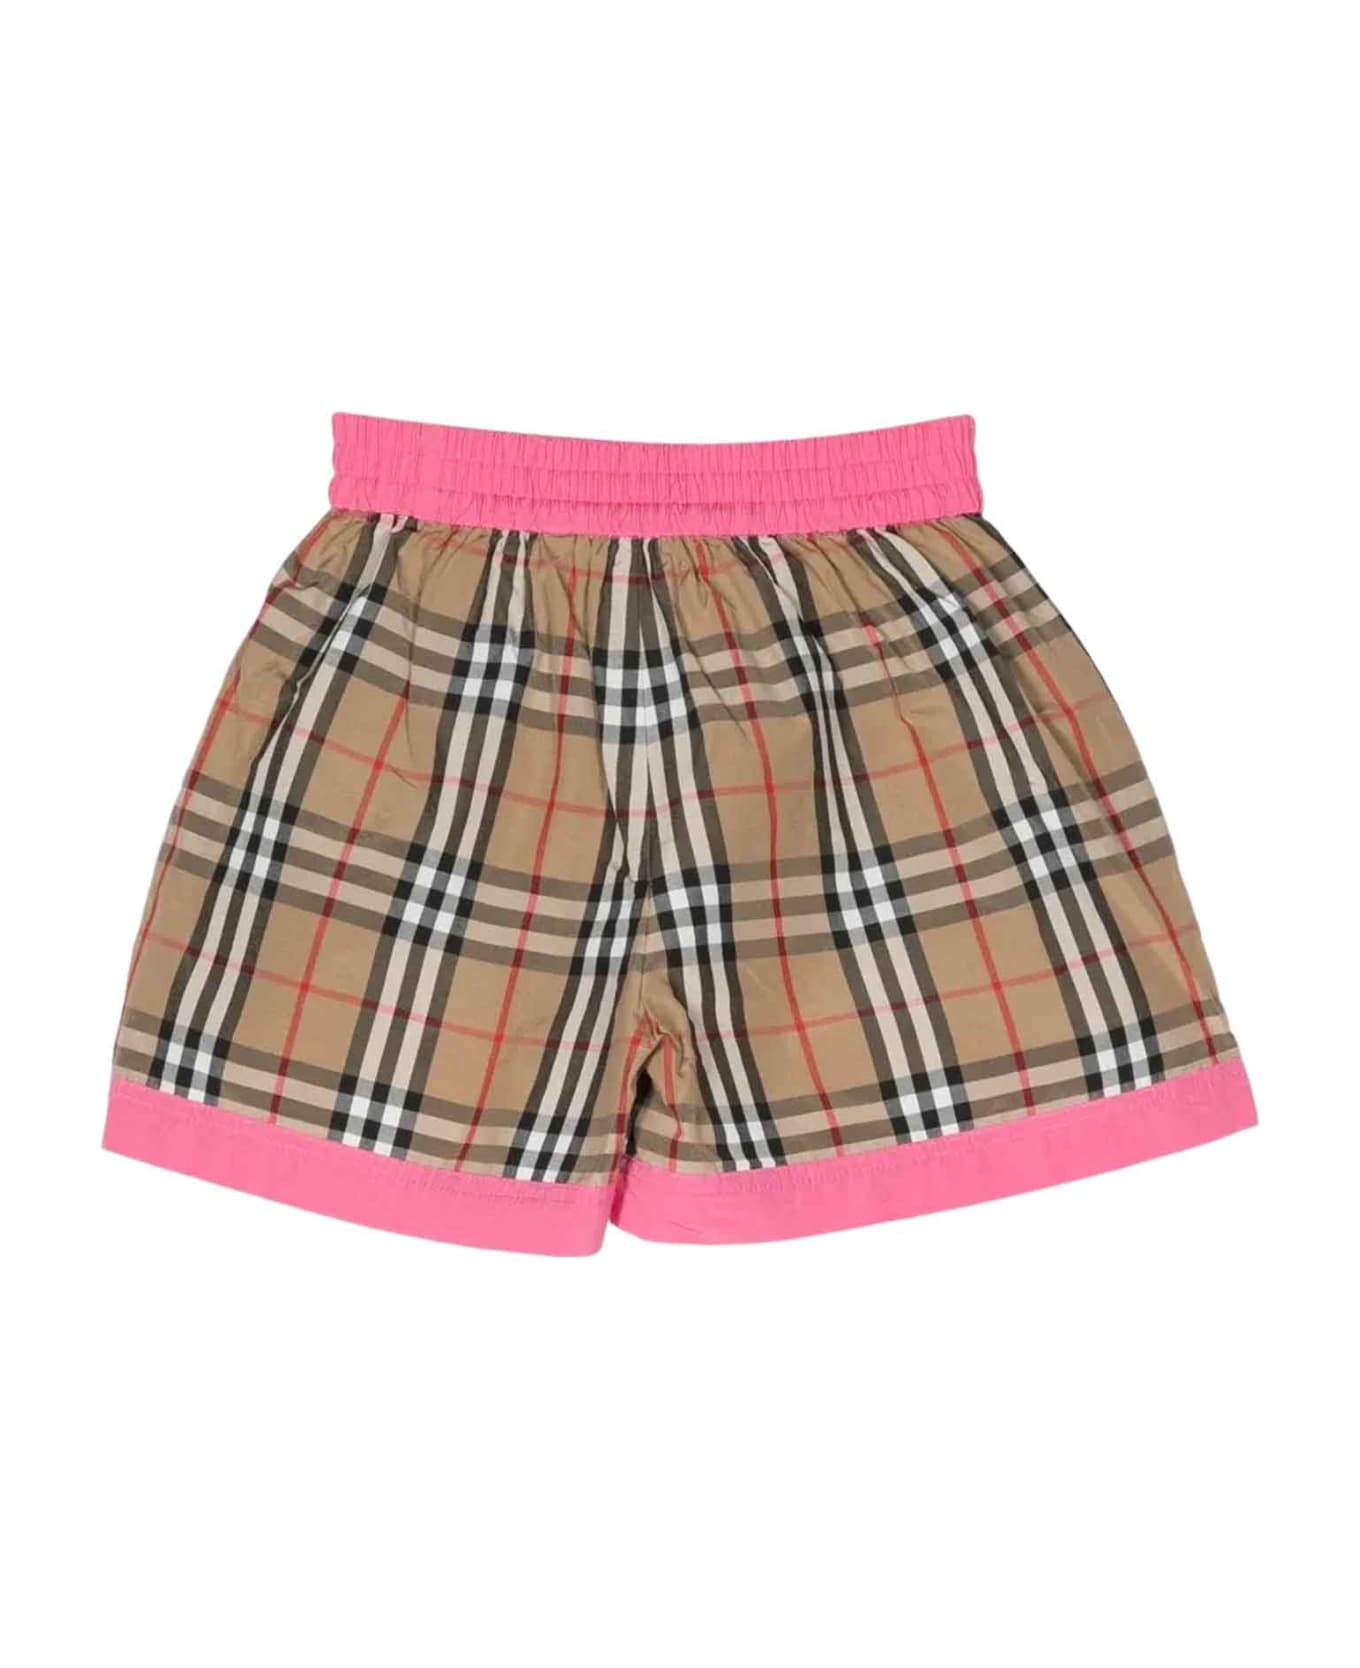 Burberry Pink Shorts Girl - Rosa ボトムス